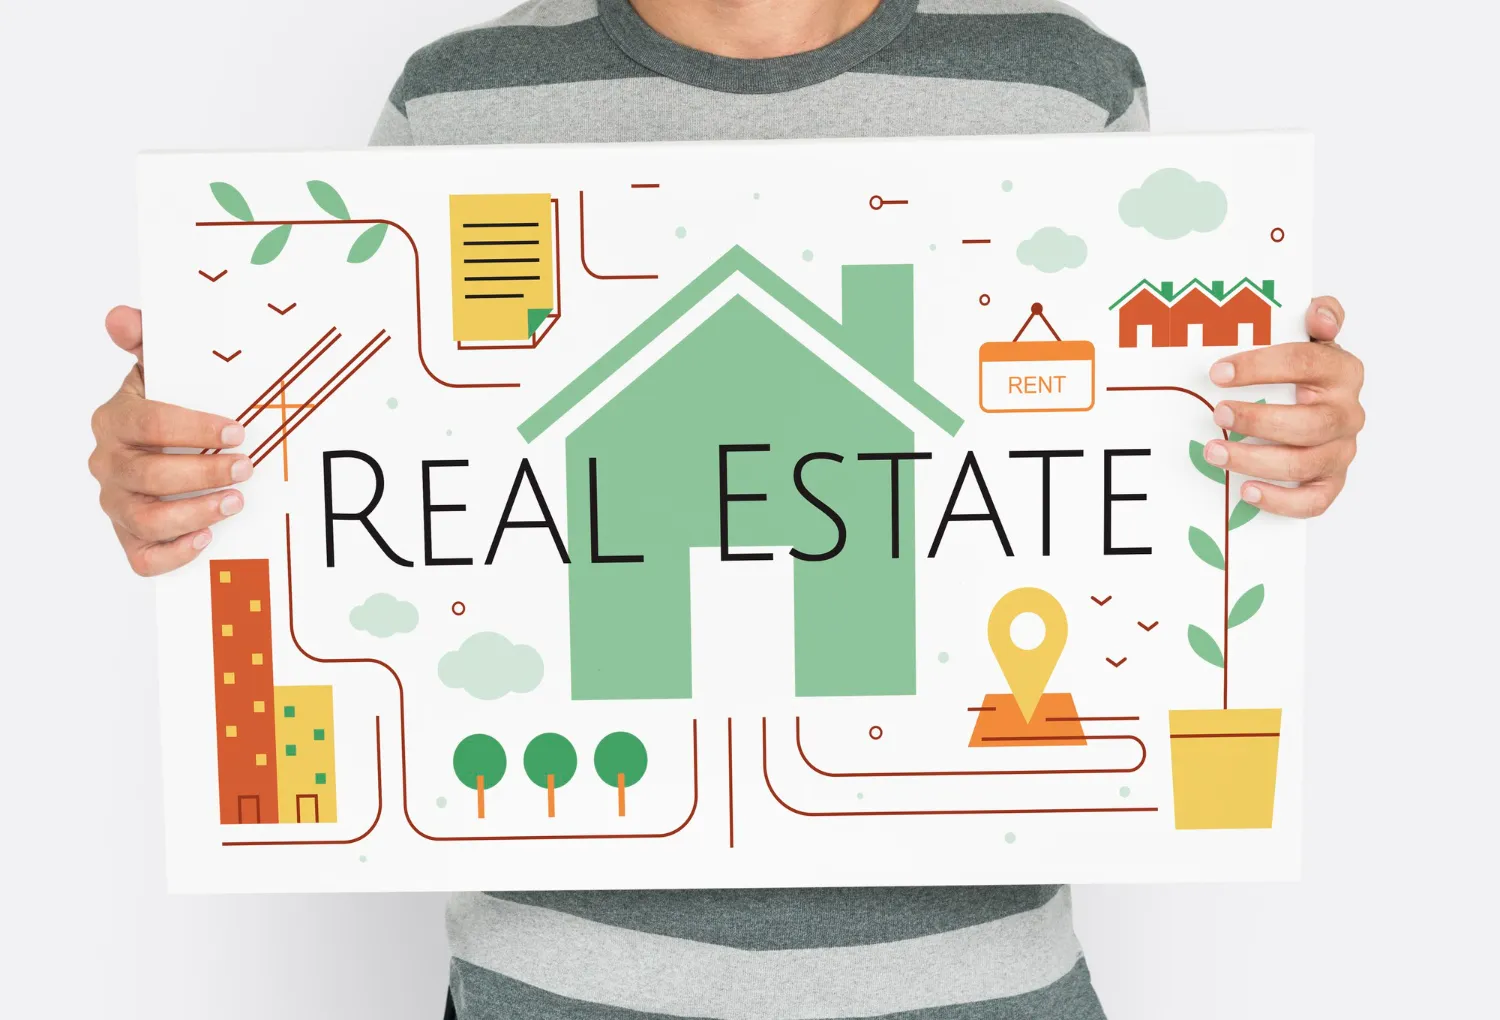 Proven Real Estate Marketing Techniques to Grow Your Business